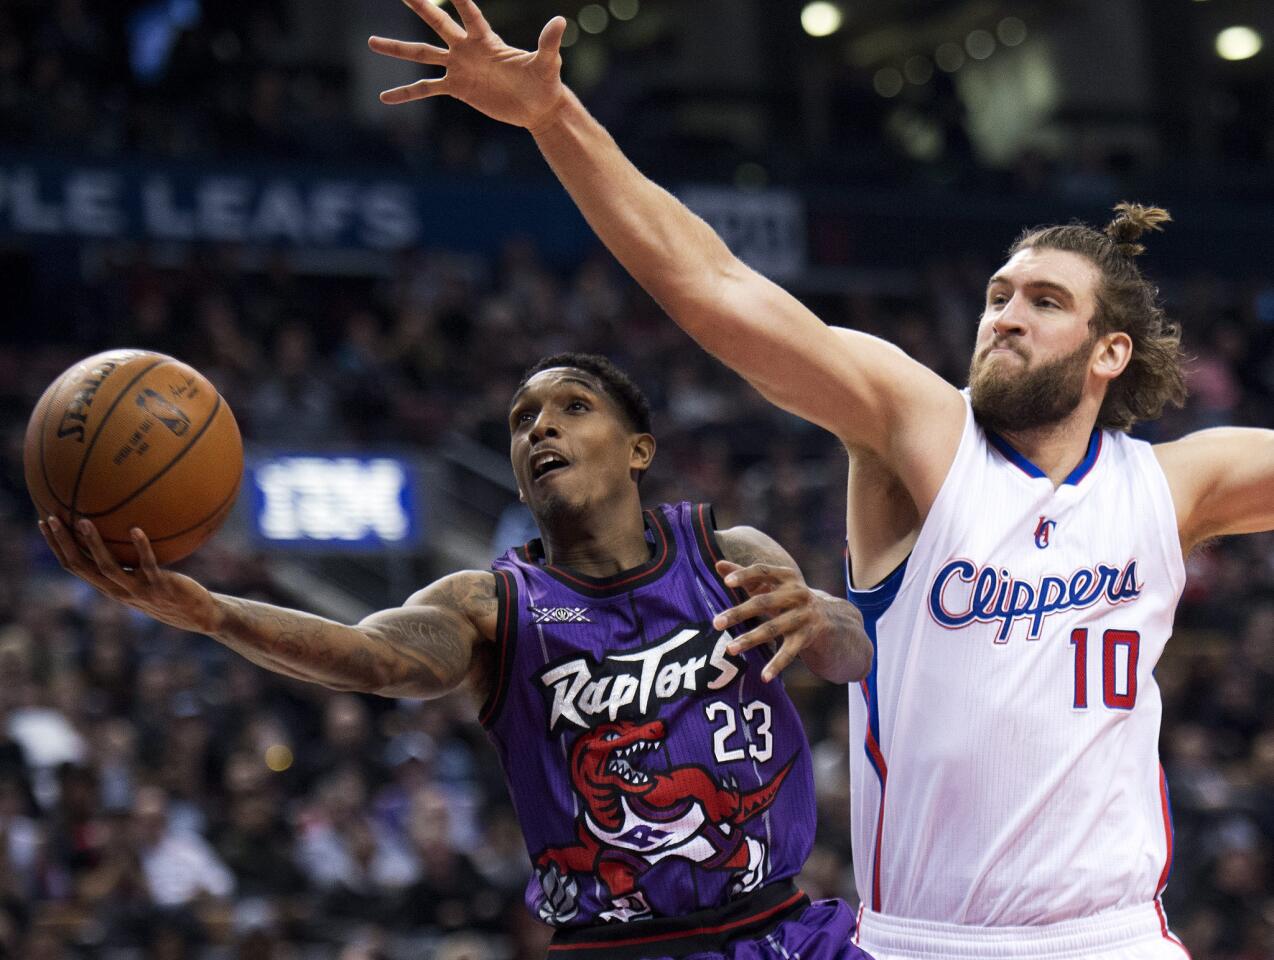 Raptors shooting guard Louis Williams uses his body to shield away Clippers center Spencer Hawes, who tries to block Williams' shot in the first half.